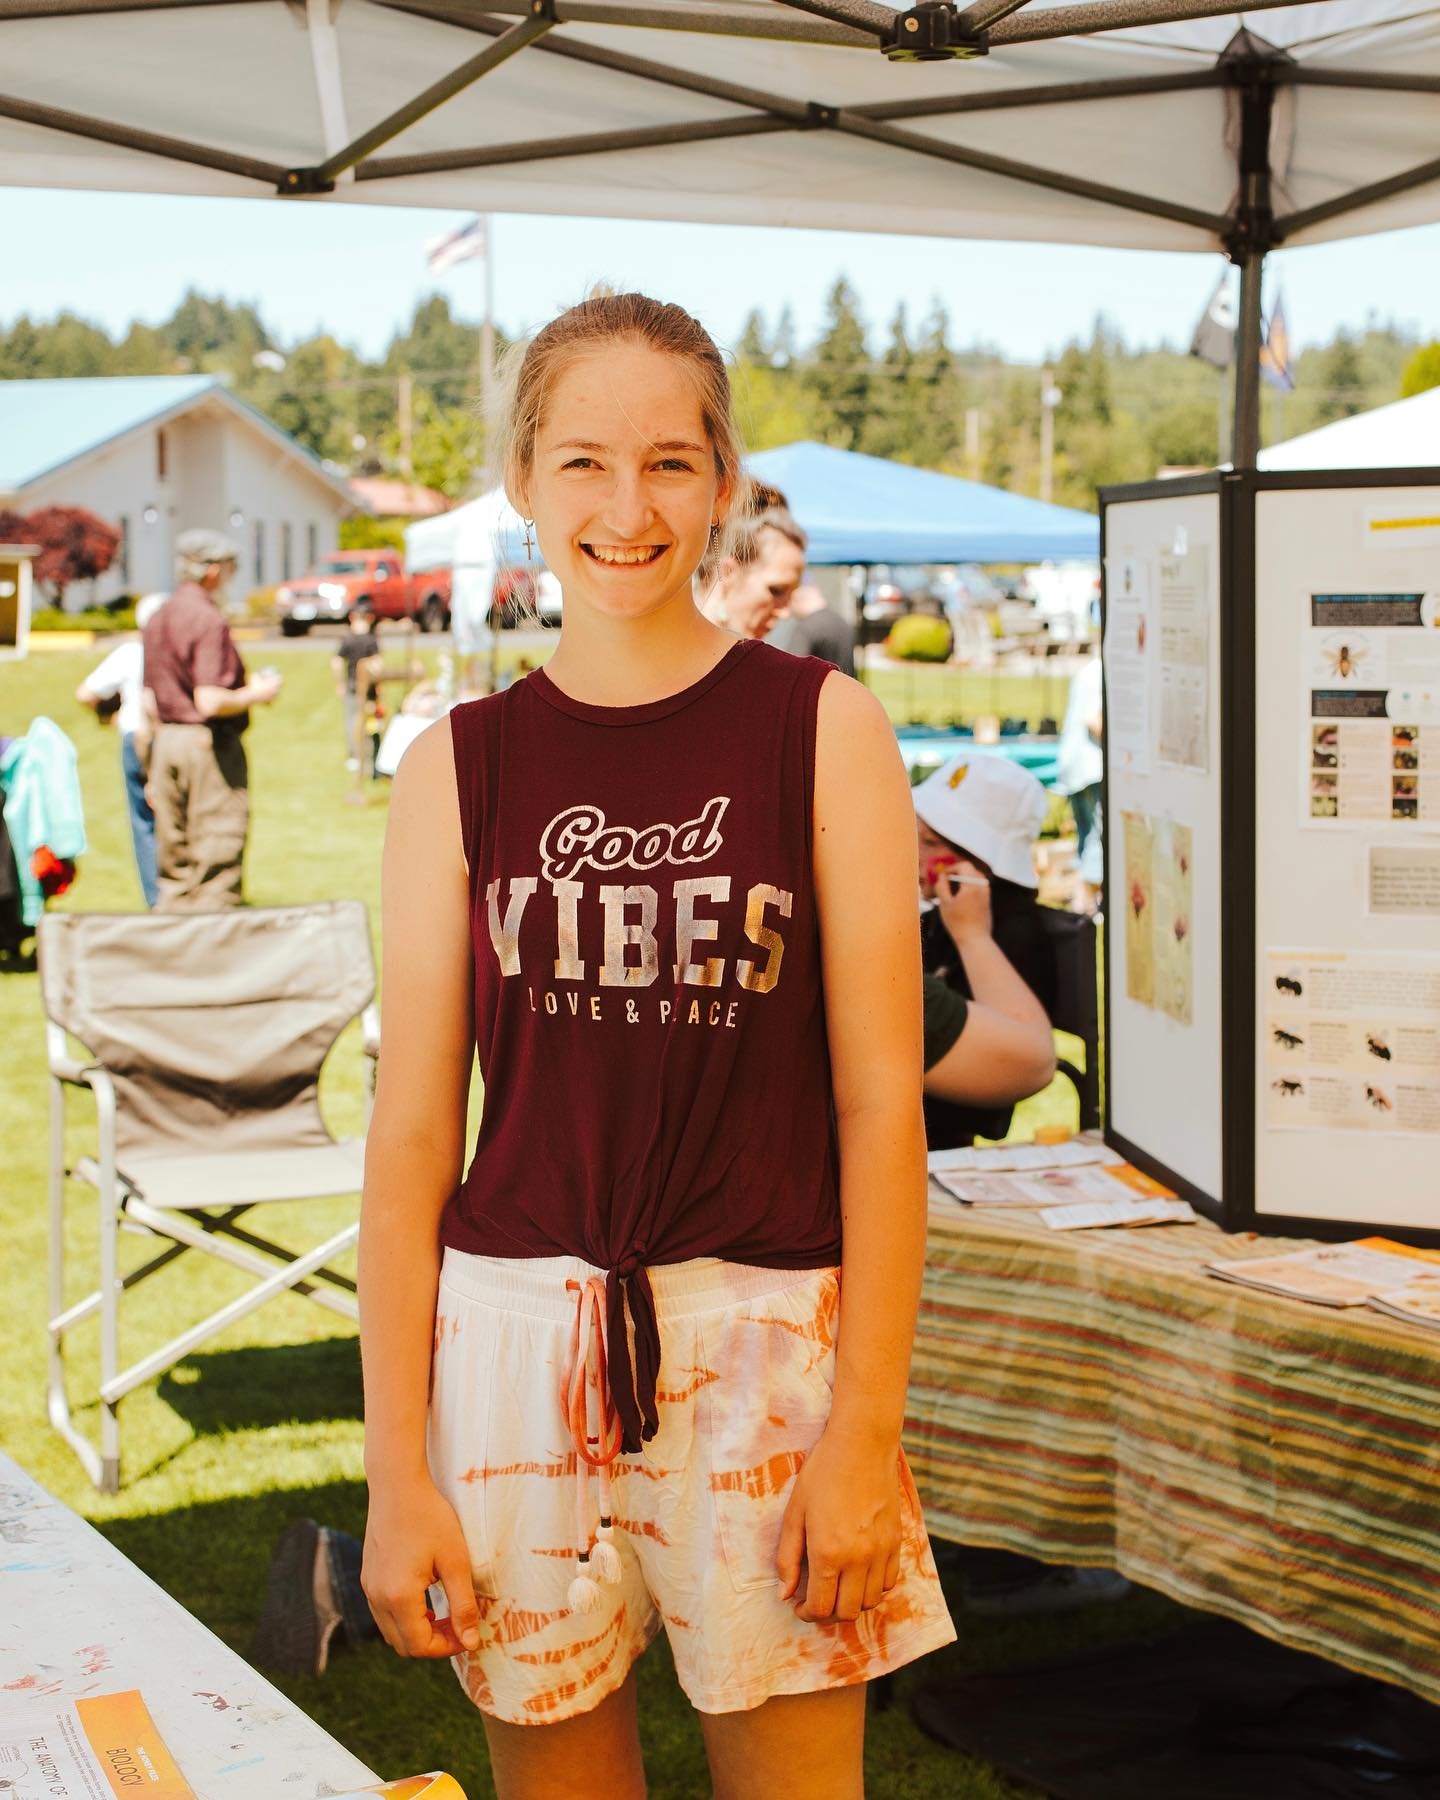 Still time to apply for a CFC FARMERS MARKET Internship! 

The Teen Ambassador program is an unpaid volunteer position at the 2024 Saturday Market season (June 1 to September 28). The hours are 8:30 am to 3:30 pm. We are looking for high school stude